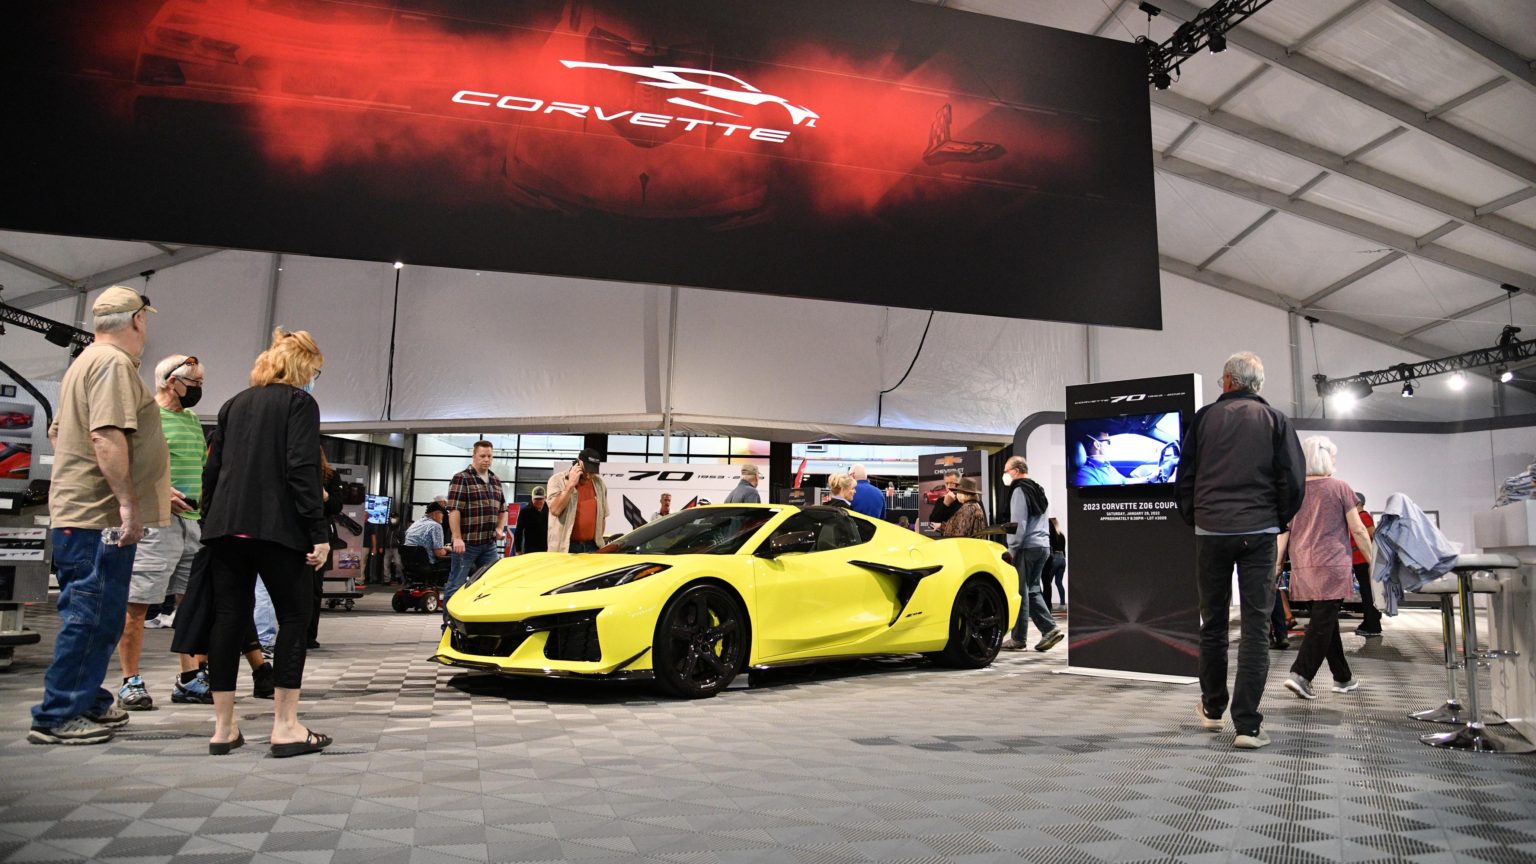 The Z06 raised $3.6 million for Operation Homefront, a veteran's assistance organization.